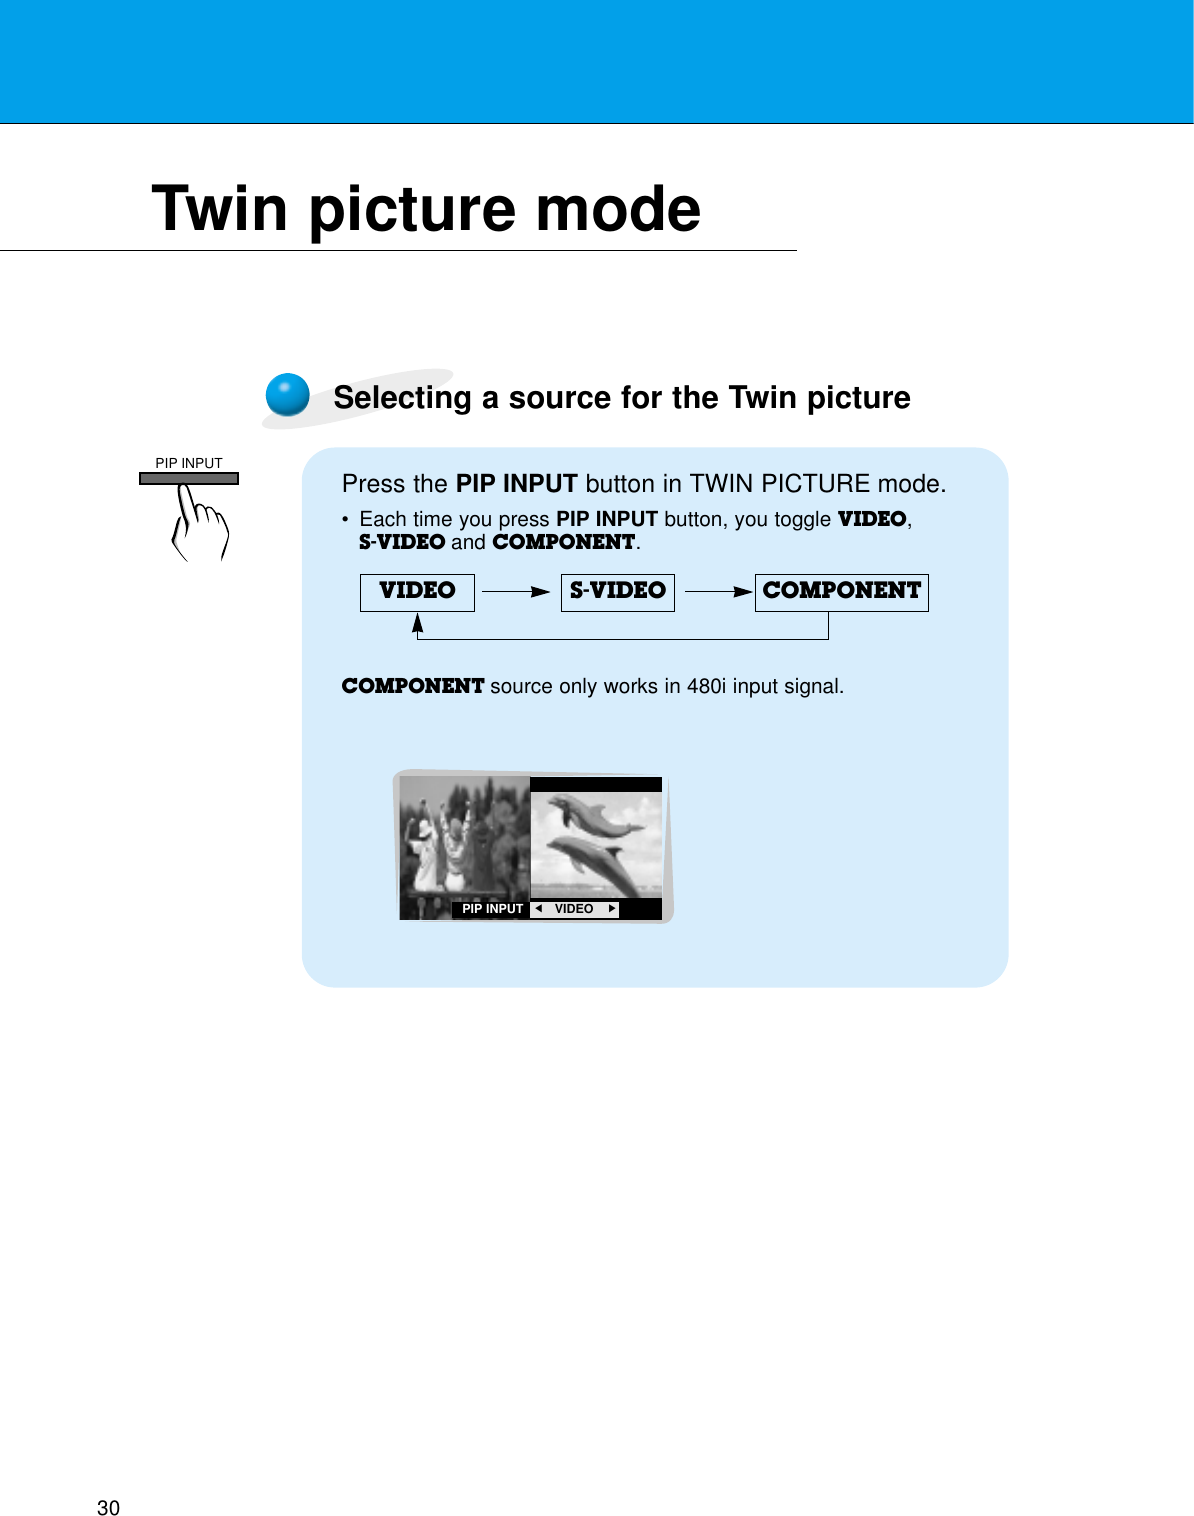 30Twin picture modeSelecting a source for the Twin picturePress the PIP INPUT button in TWIN PICTURE mode.•Each time you press PIP INPUT button, you toggle VIDEO, S-VIDEO and COMPONENT.COMPONENT source only works in 480i input signal.PIP INPUTF   VIDEO GVIDEO S-VIDEO COMPONENTPIP INPUT